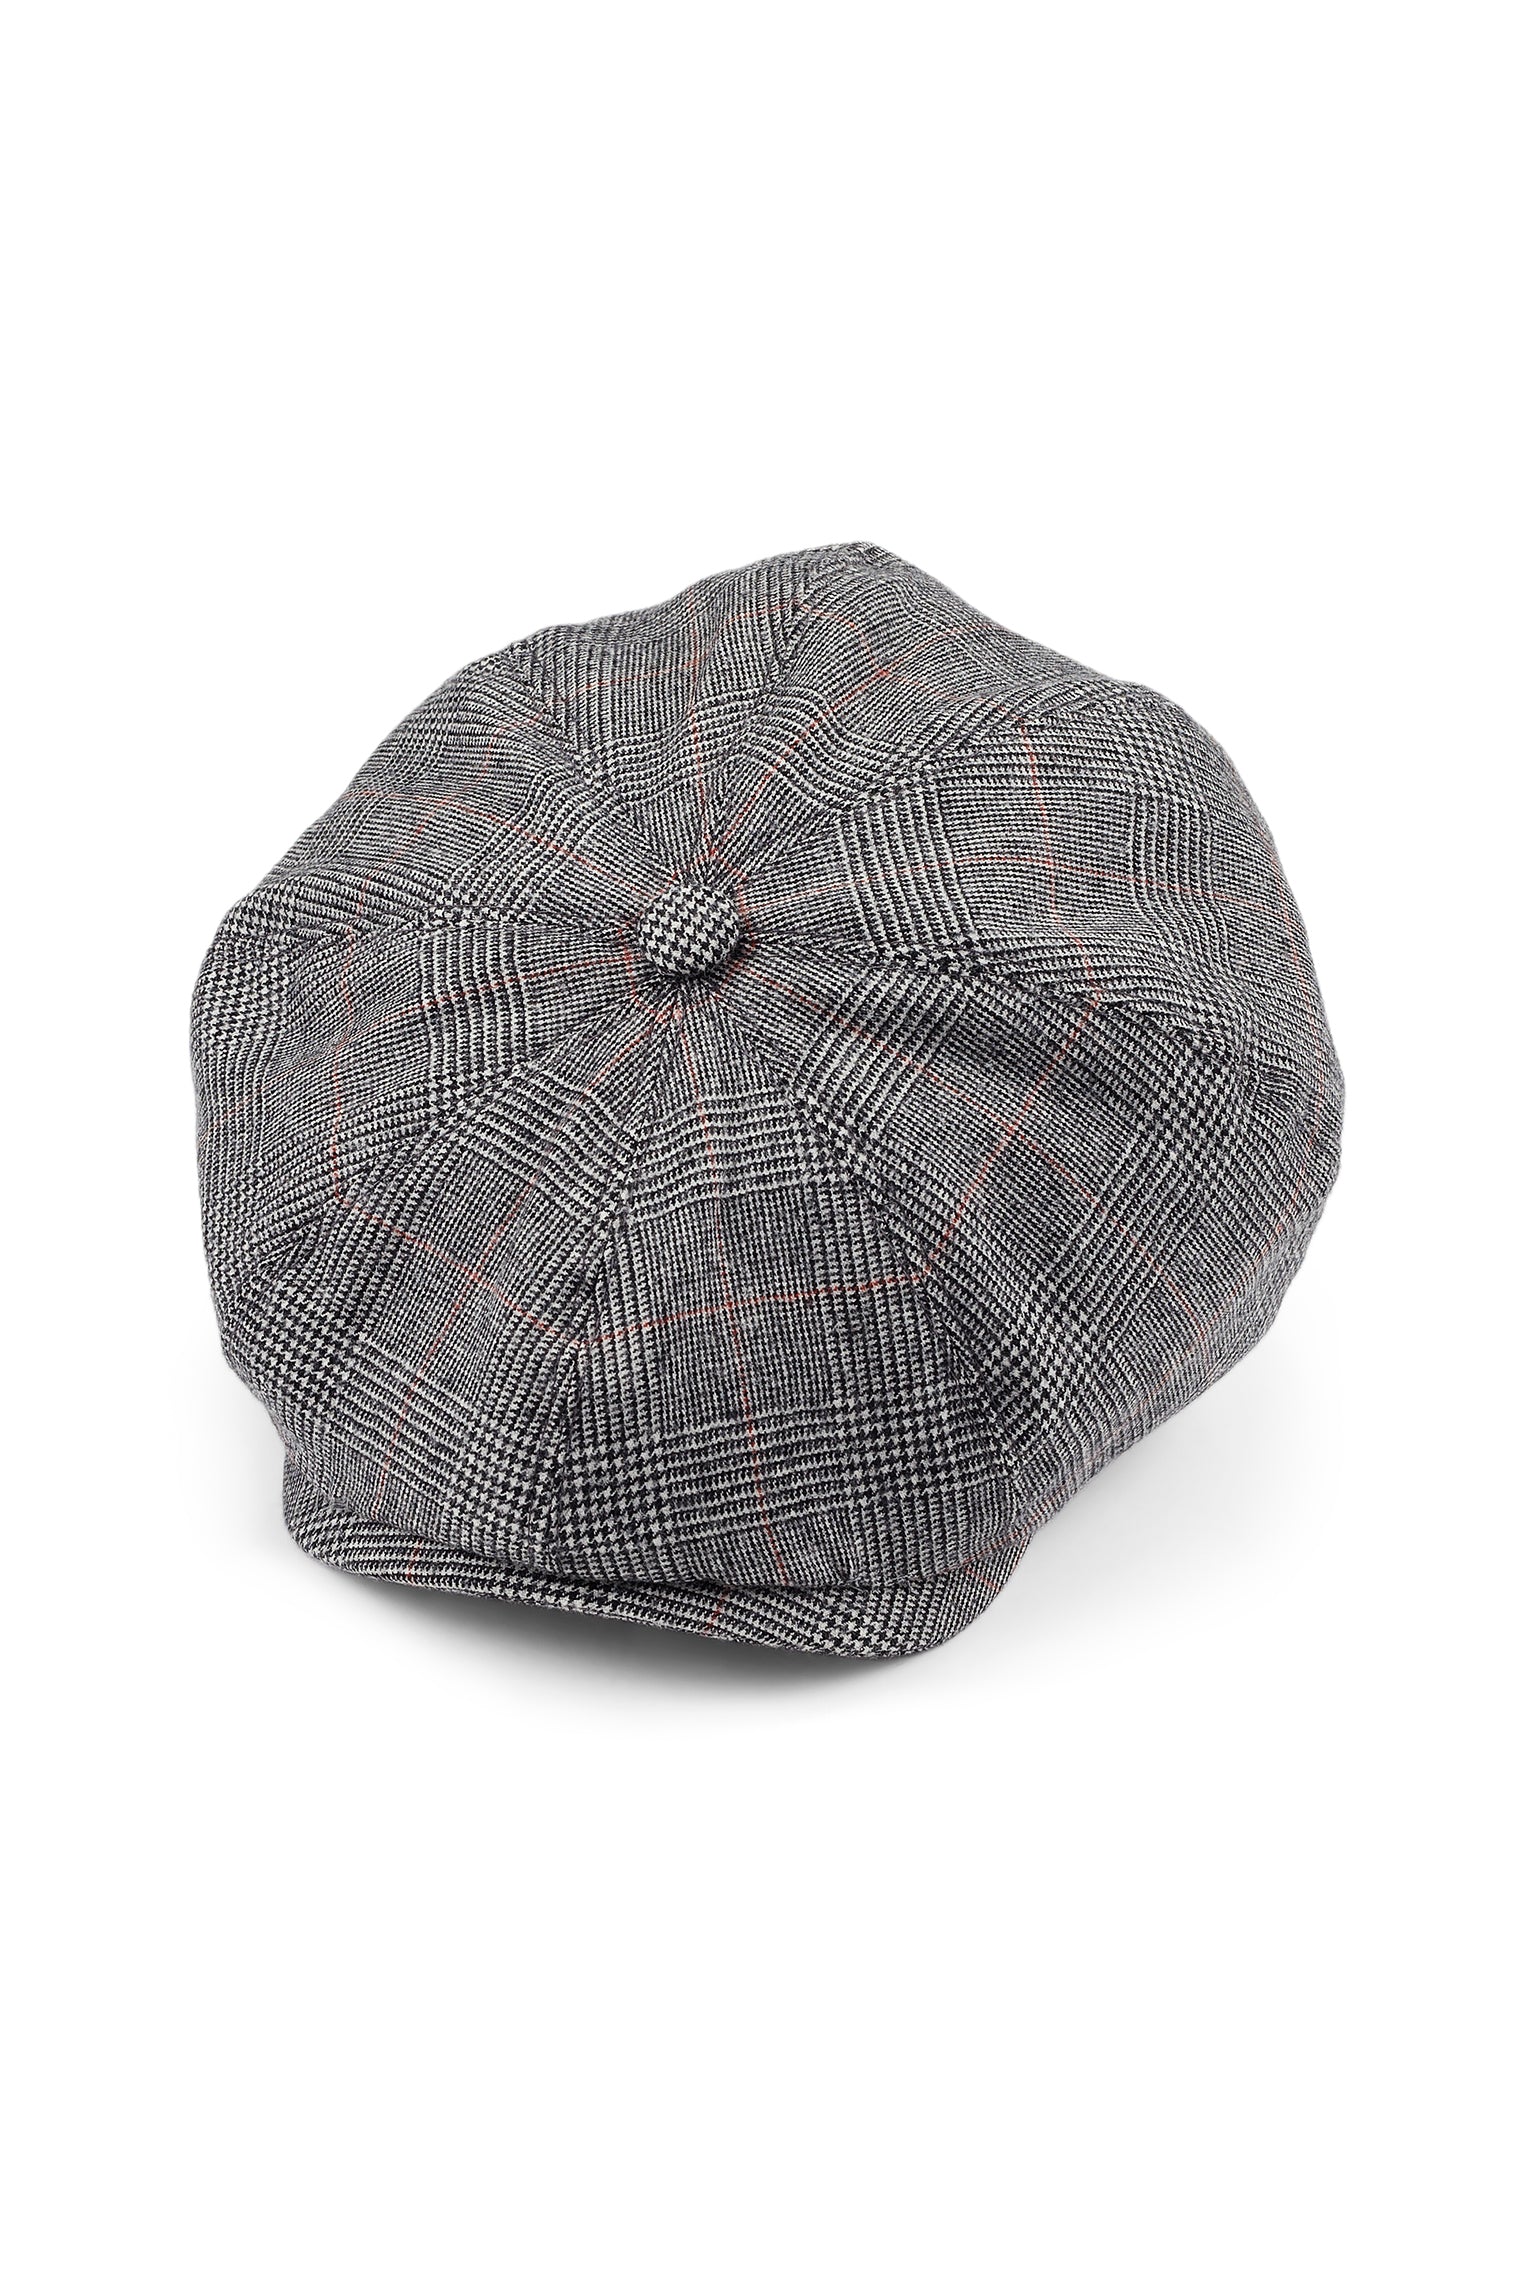 Highgrove Grey Bakerboy Cap - Limited Edition Collection - Lock & Co. Hatters London UK